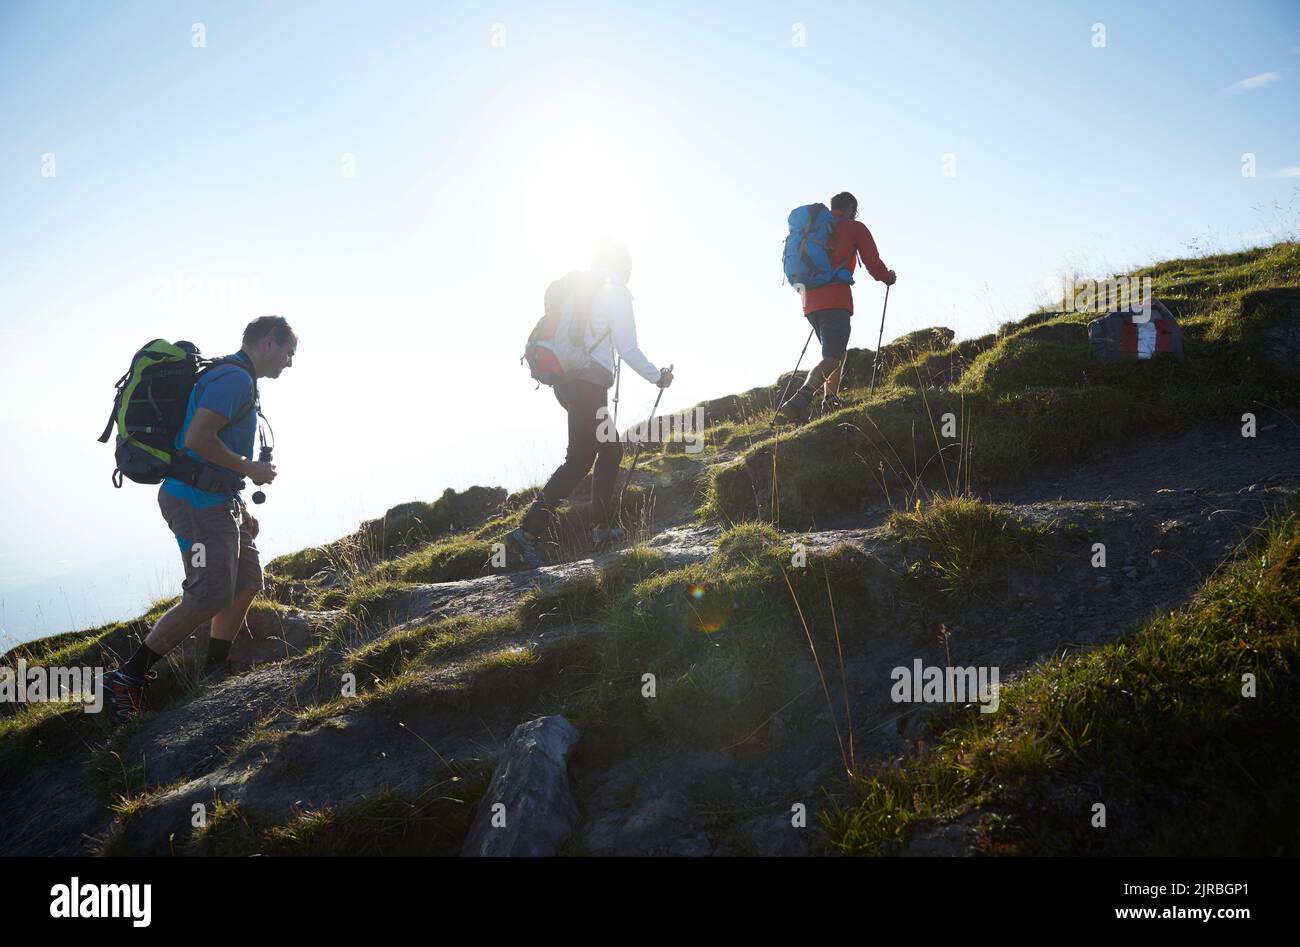 Hikers climbing mountain on sunny day, Mutters, Tyrol, Austria Stock Photo